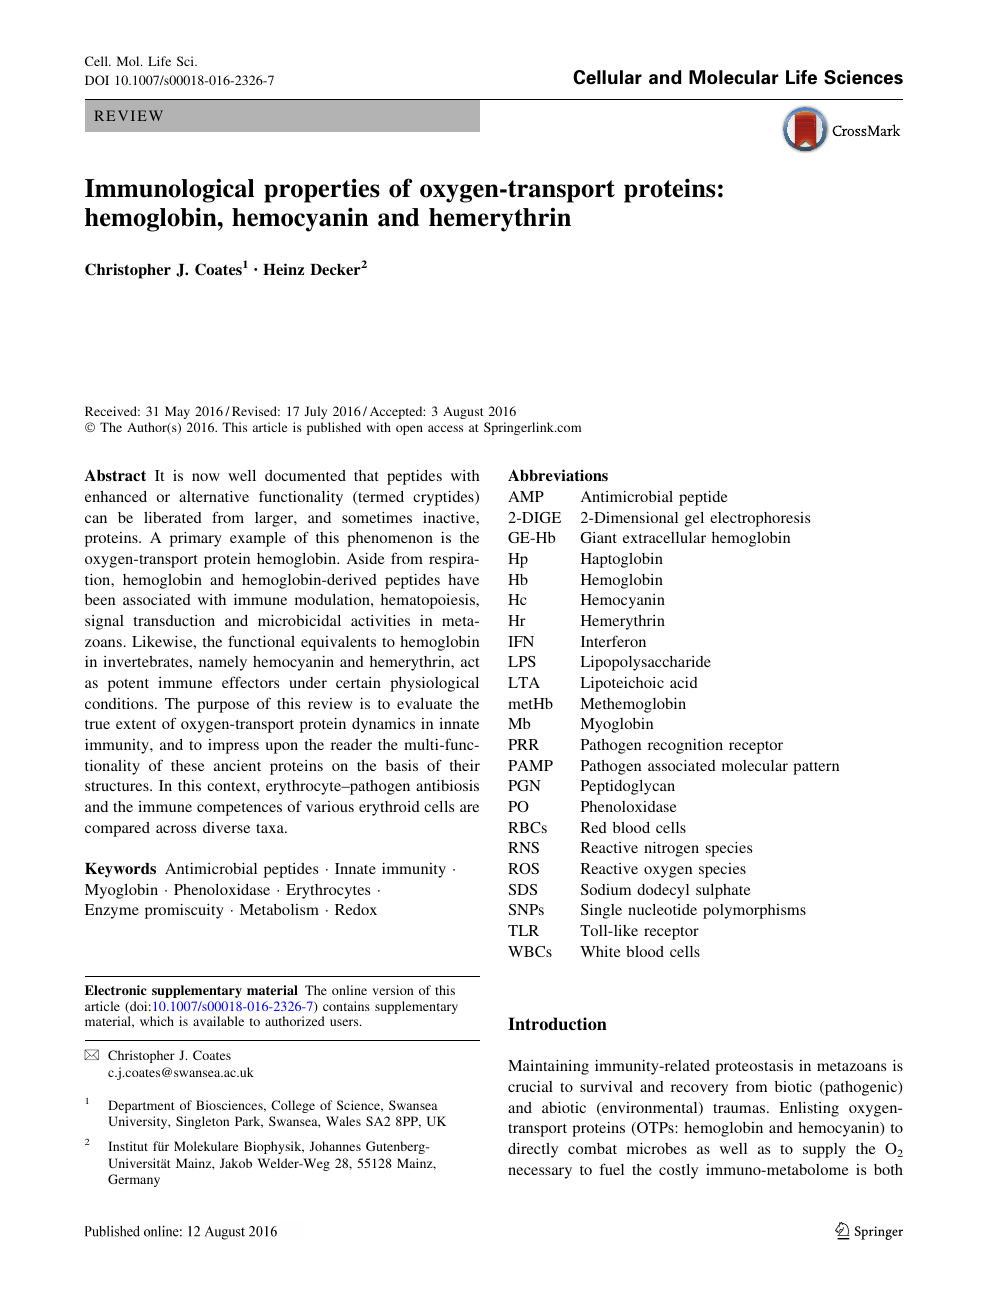 Immunological Properties Of Oxygen Transport Proteins Hemoglobin Hemocyanin And Hemerythrin Topic Of Research Paper In Biological Sciences Download Scholarly Article Pdf And Read For Free On Cyberleninka Open Science Hub